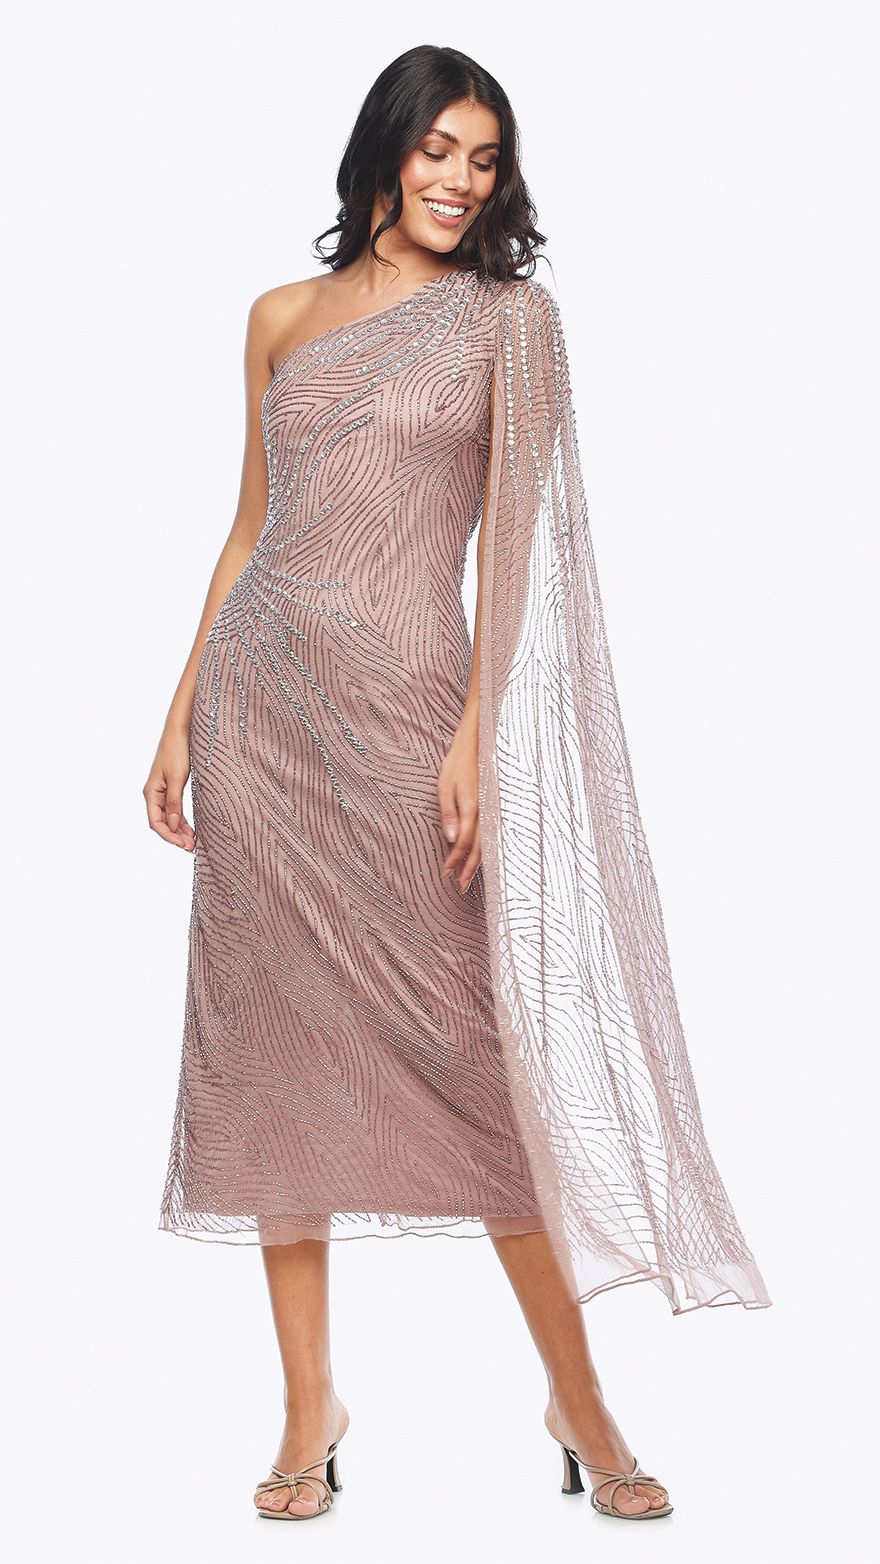 Beaded Dress with Draped Sleeve and One-Shoulder.JPG